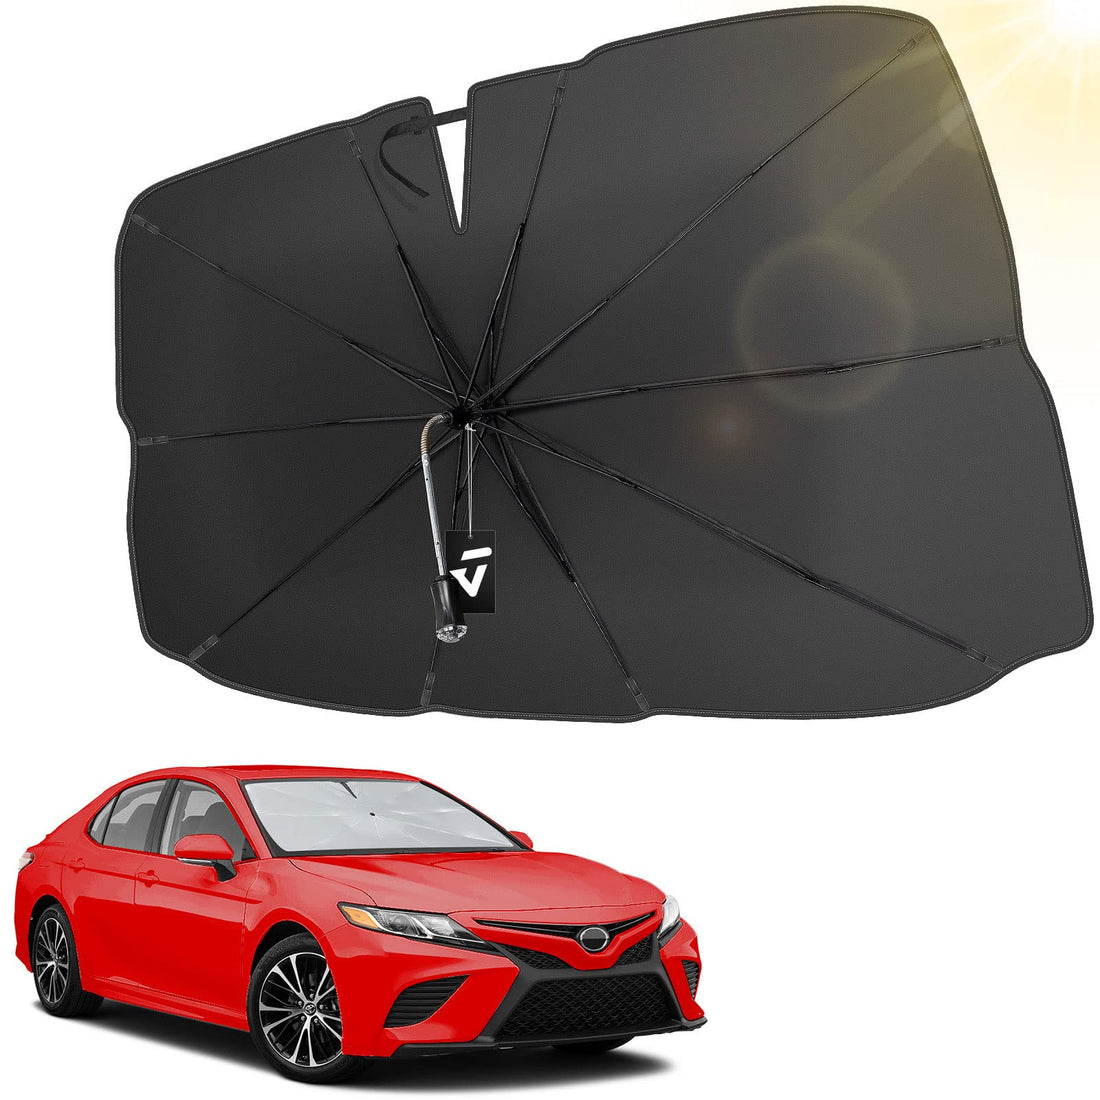 Windshield Sun Shade Umbrella, with Car Safety Hammer, 360° Rotation Bendable Shaft Foldable, for Truck 57''x 33''